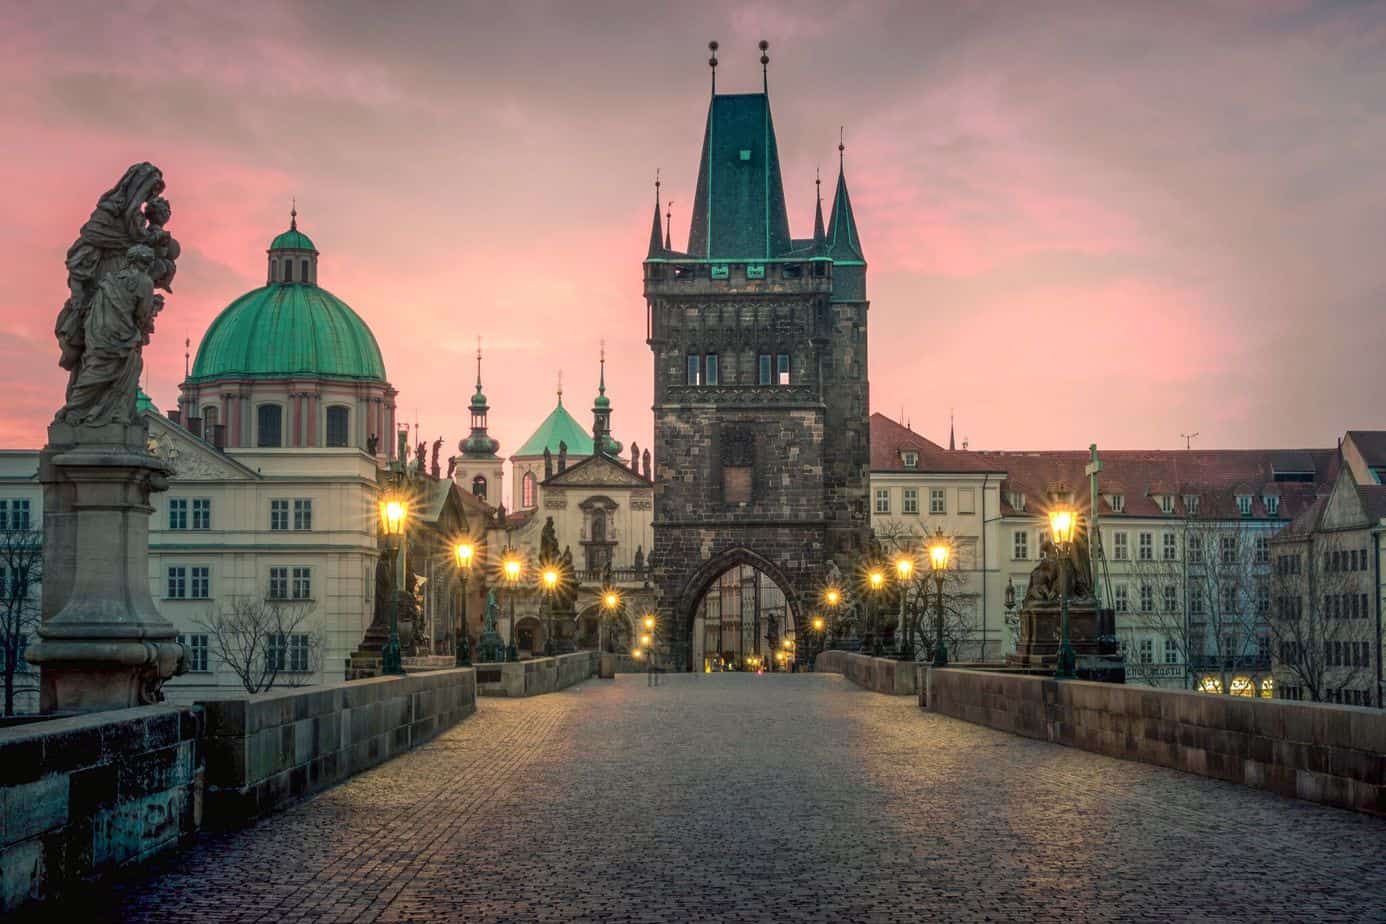 Empty cobblestone walkway leading to a city with green-top roofs. The sky is pink.